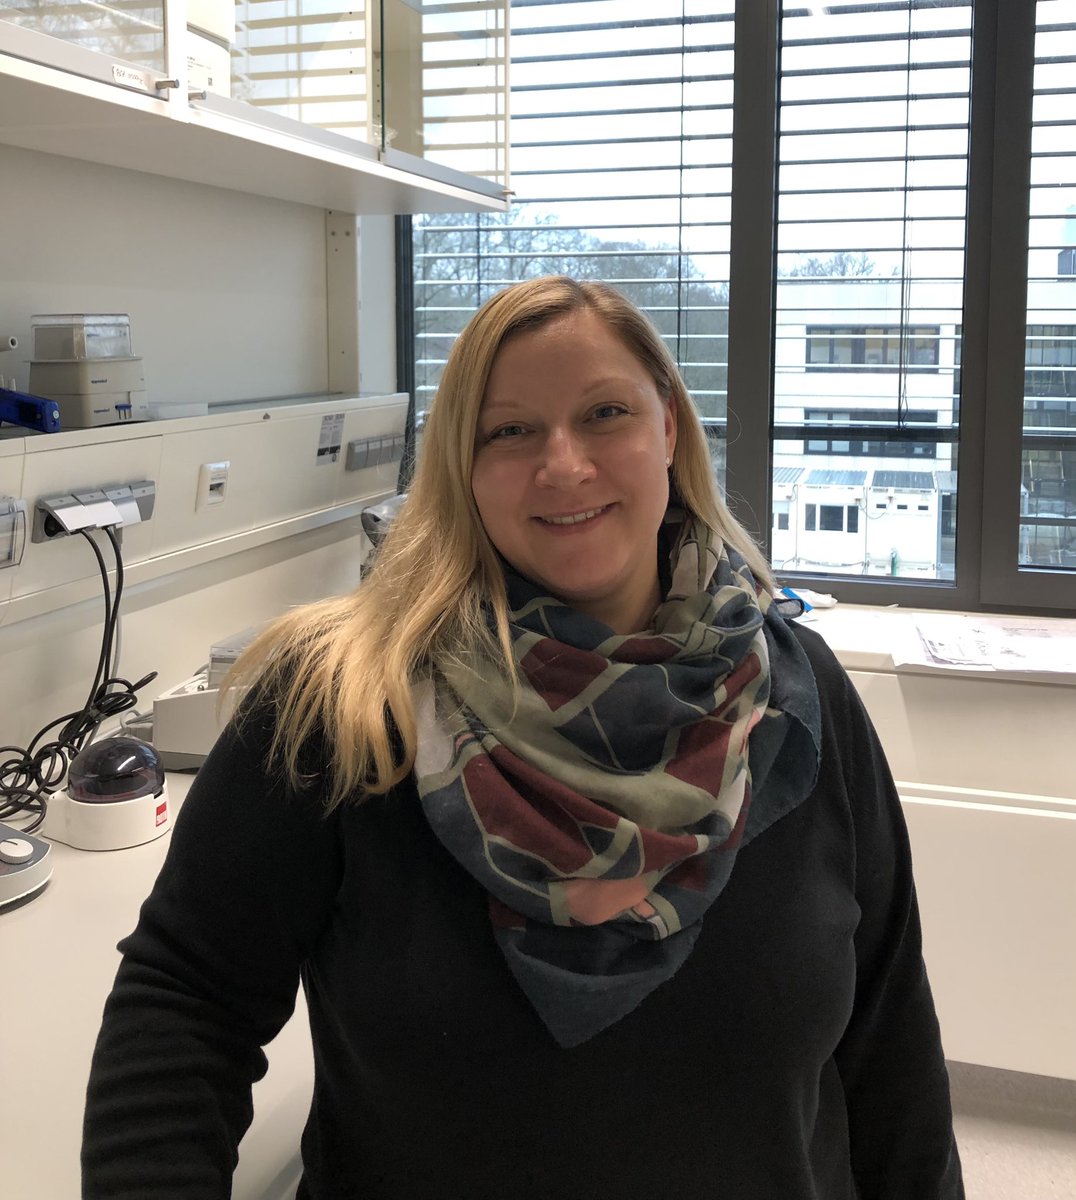 #meetourmembers
Meet our #TechnicalAssistant Jennifer Redlingshöfer. She’s the #earlybird 🦜 in the morning and always welcomes the rest of us with a big smile! We are lucky to have you with your experience and organization talent as long standing member of the lab! 🤗🥼